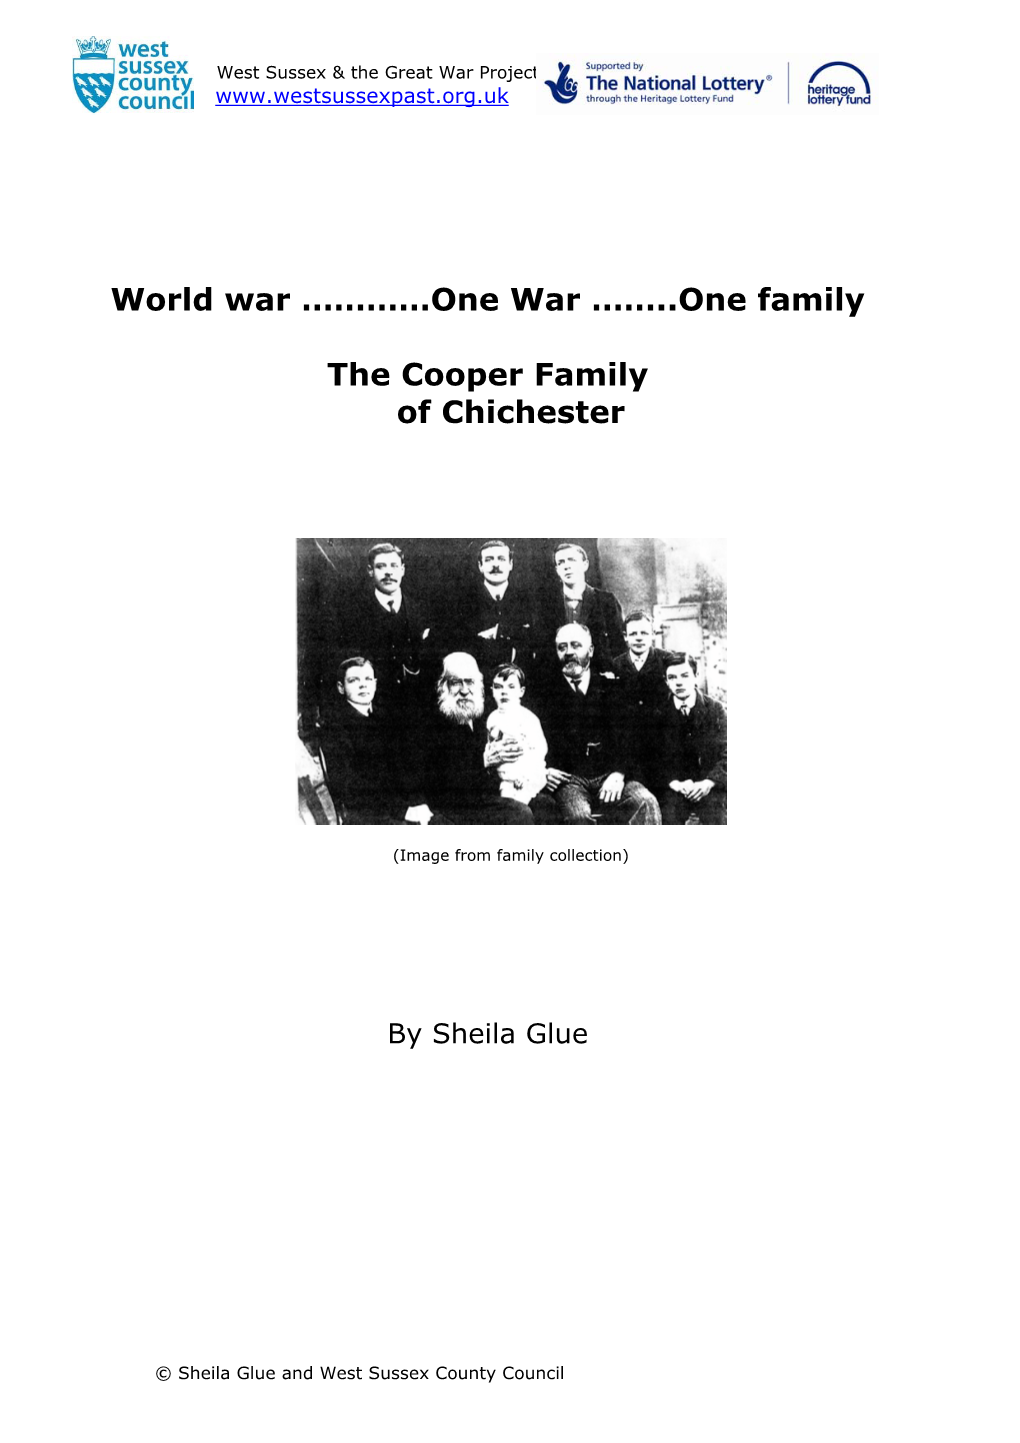 The Cooper Family of Chichester